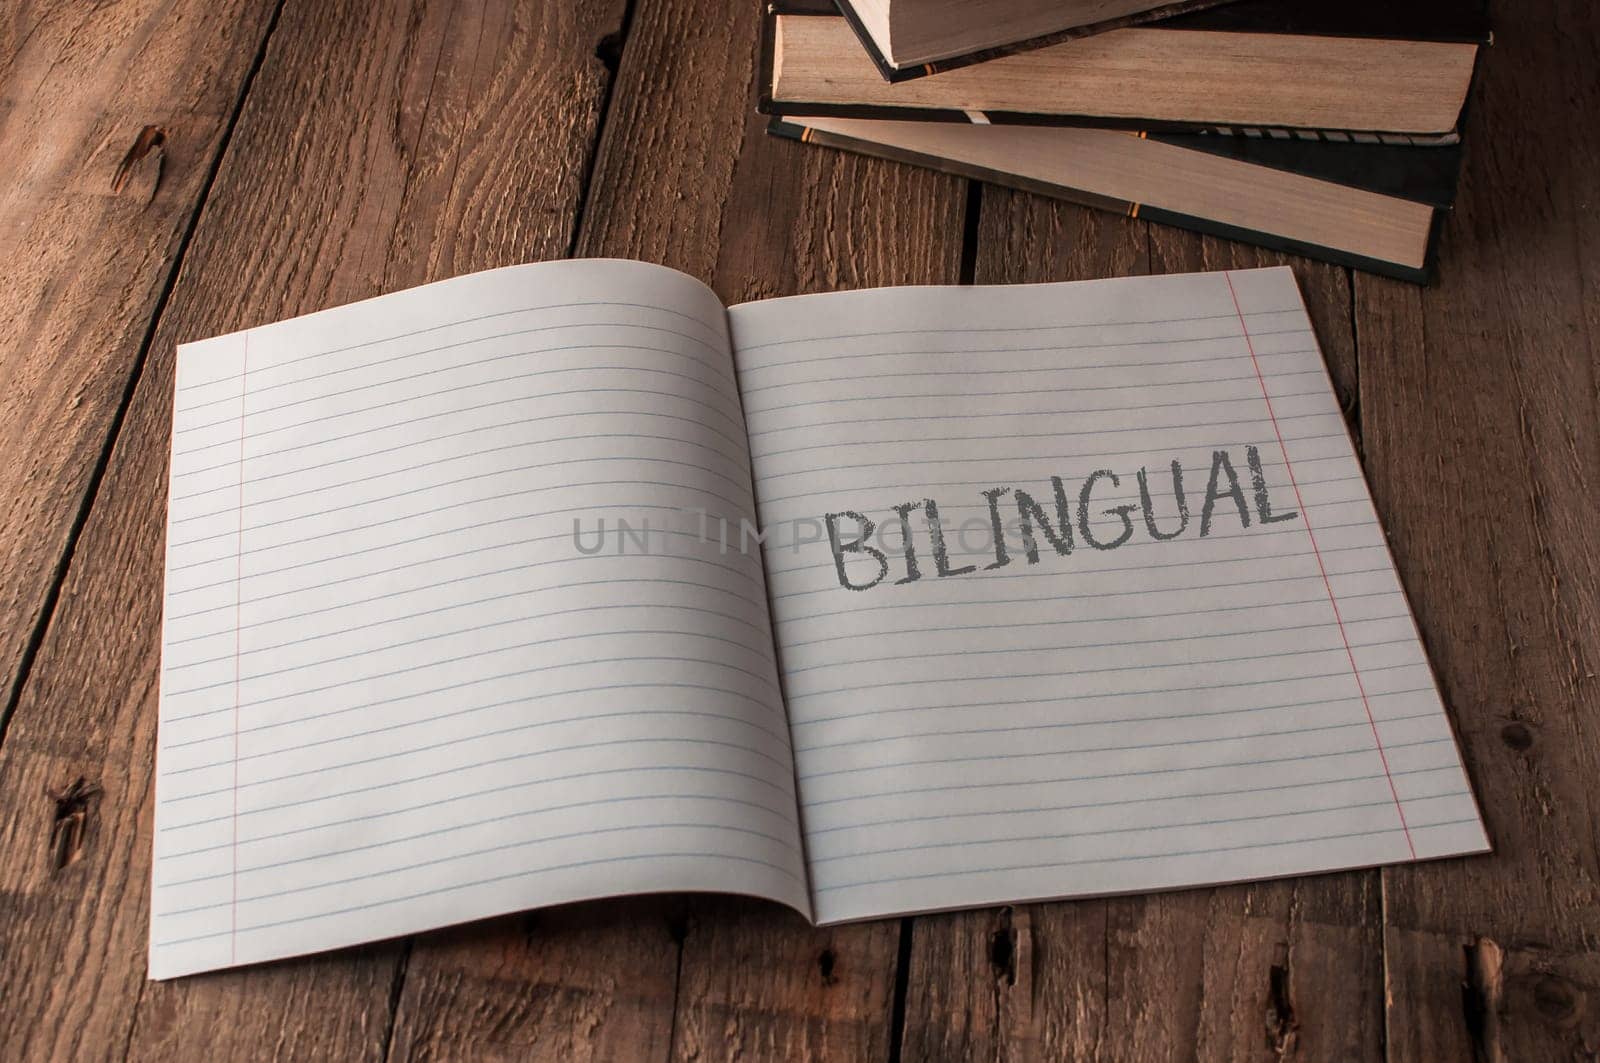 A notebook is open to a page with the word bilingual written on it. The notebook is sitting on a wooden table